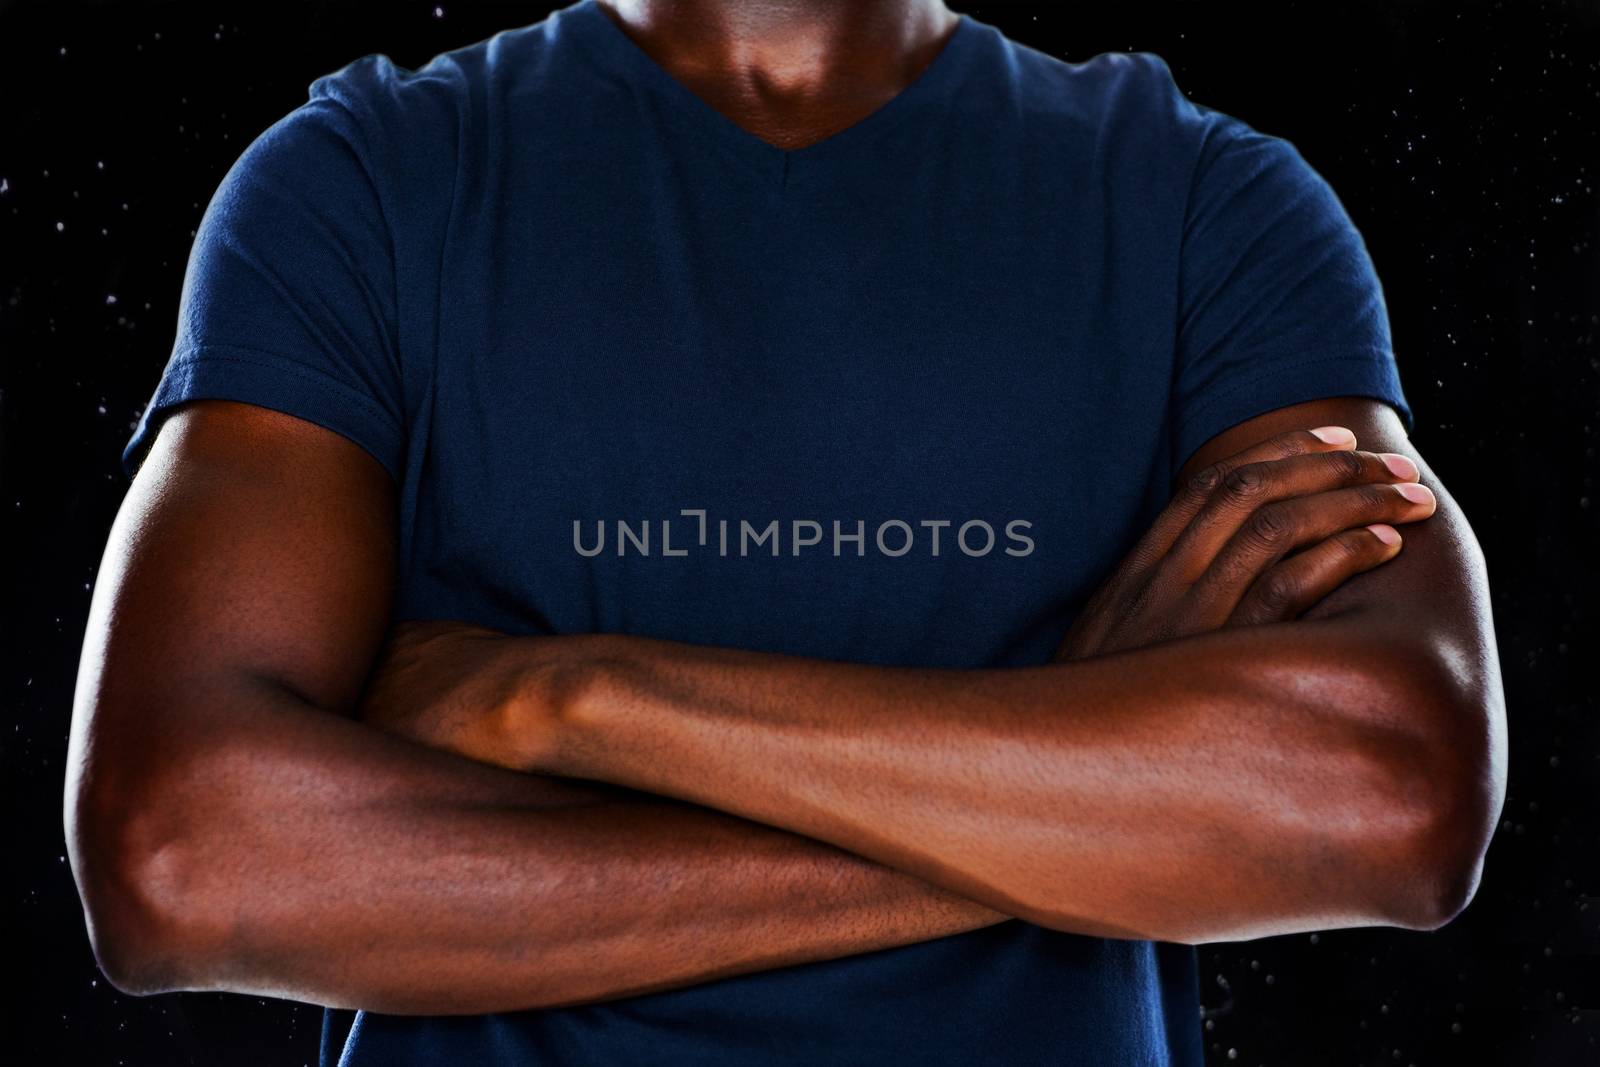 Close up mid section of man with arms crossed against black background